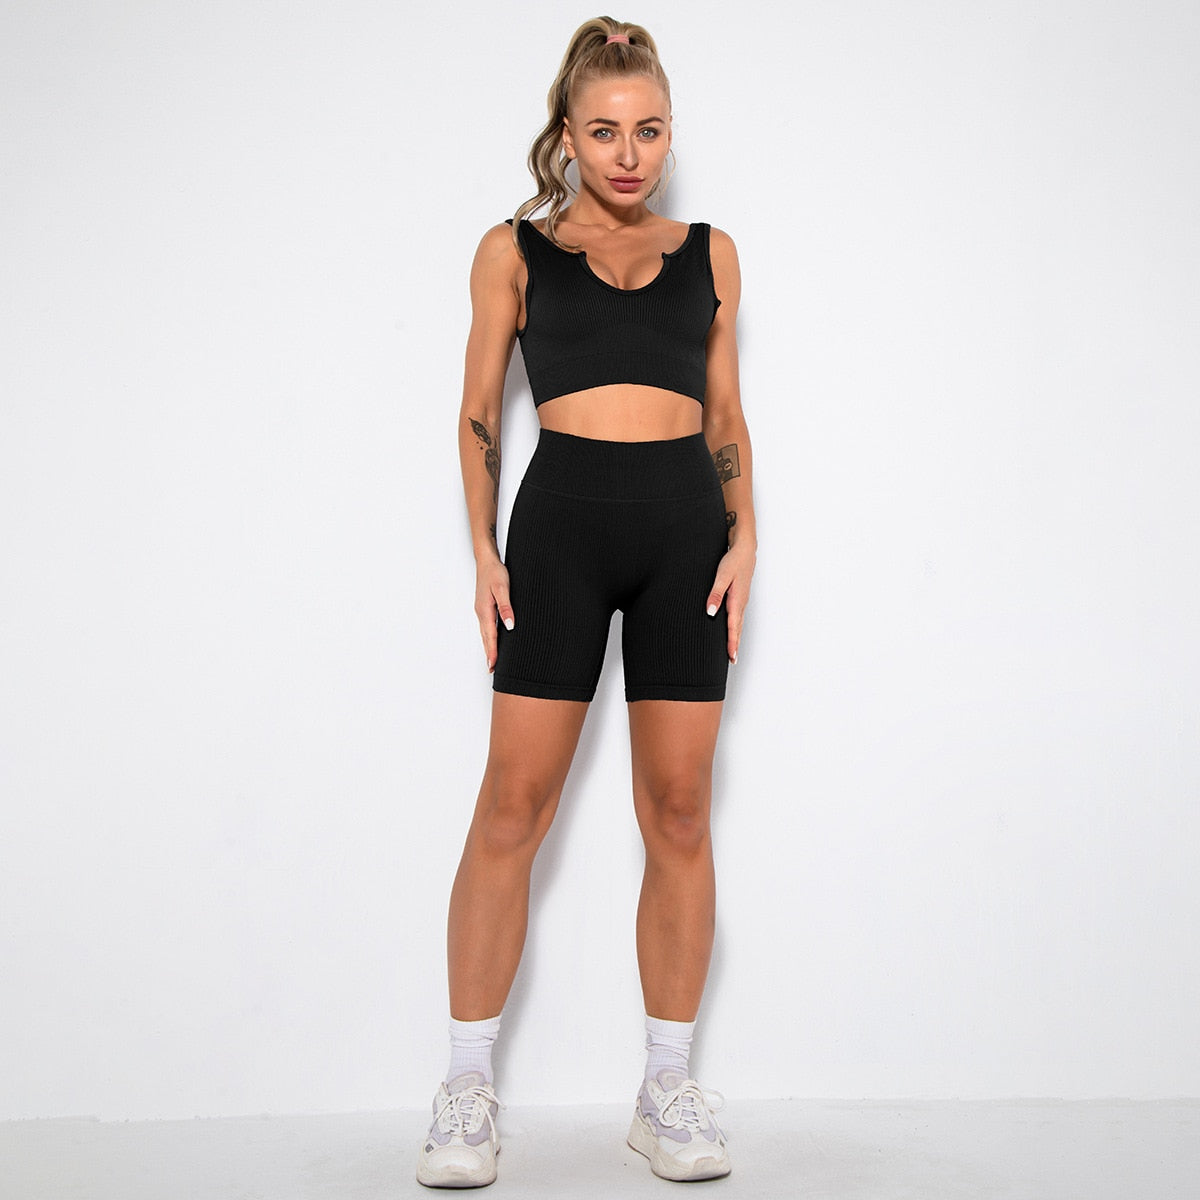 2 Piece Gym Set Women Seamless Leggings Sports Bra Workout Shorts Set Fitness Crop Top Running Outfit Suit Tracksuit Clothing